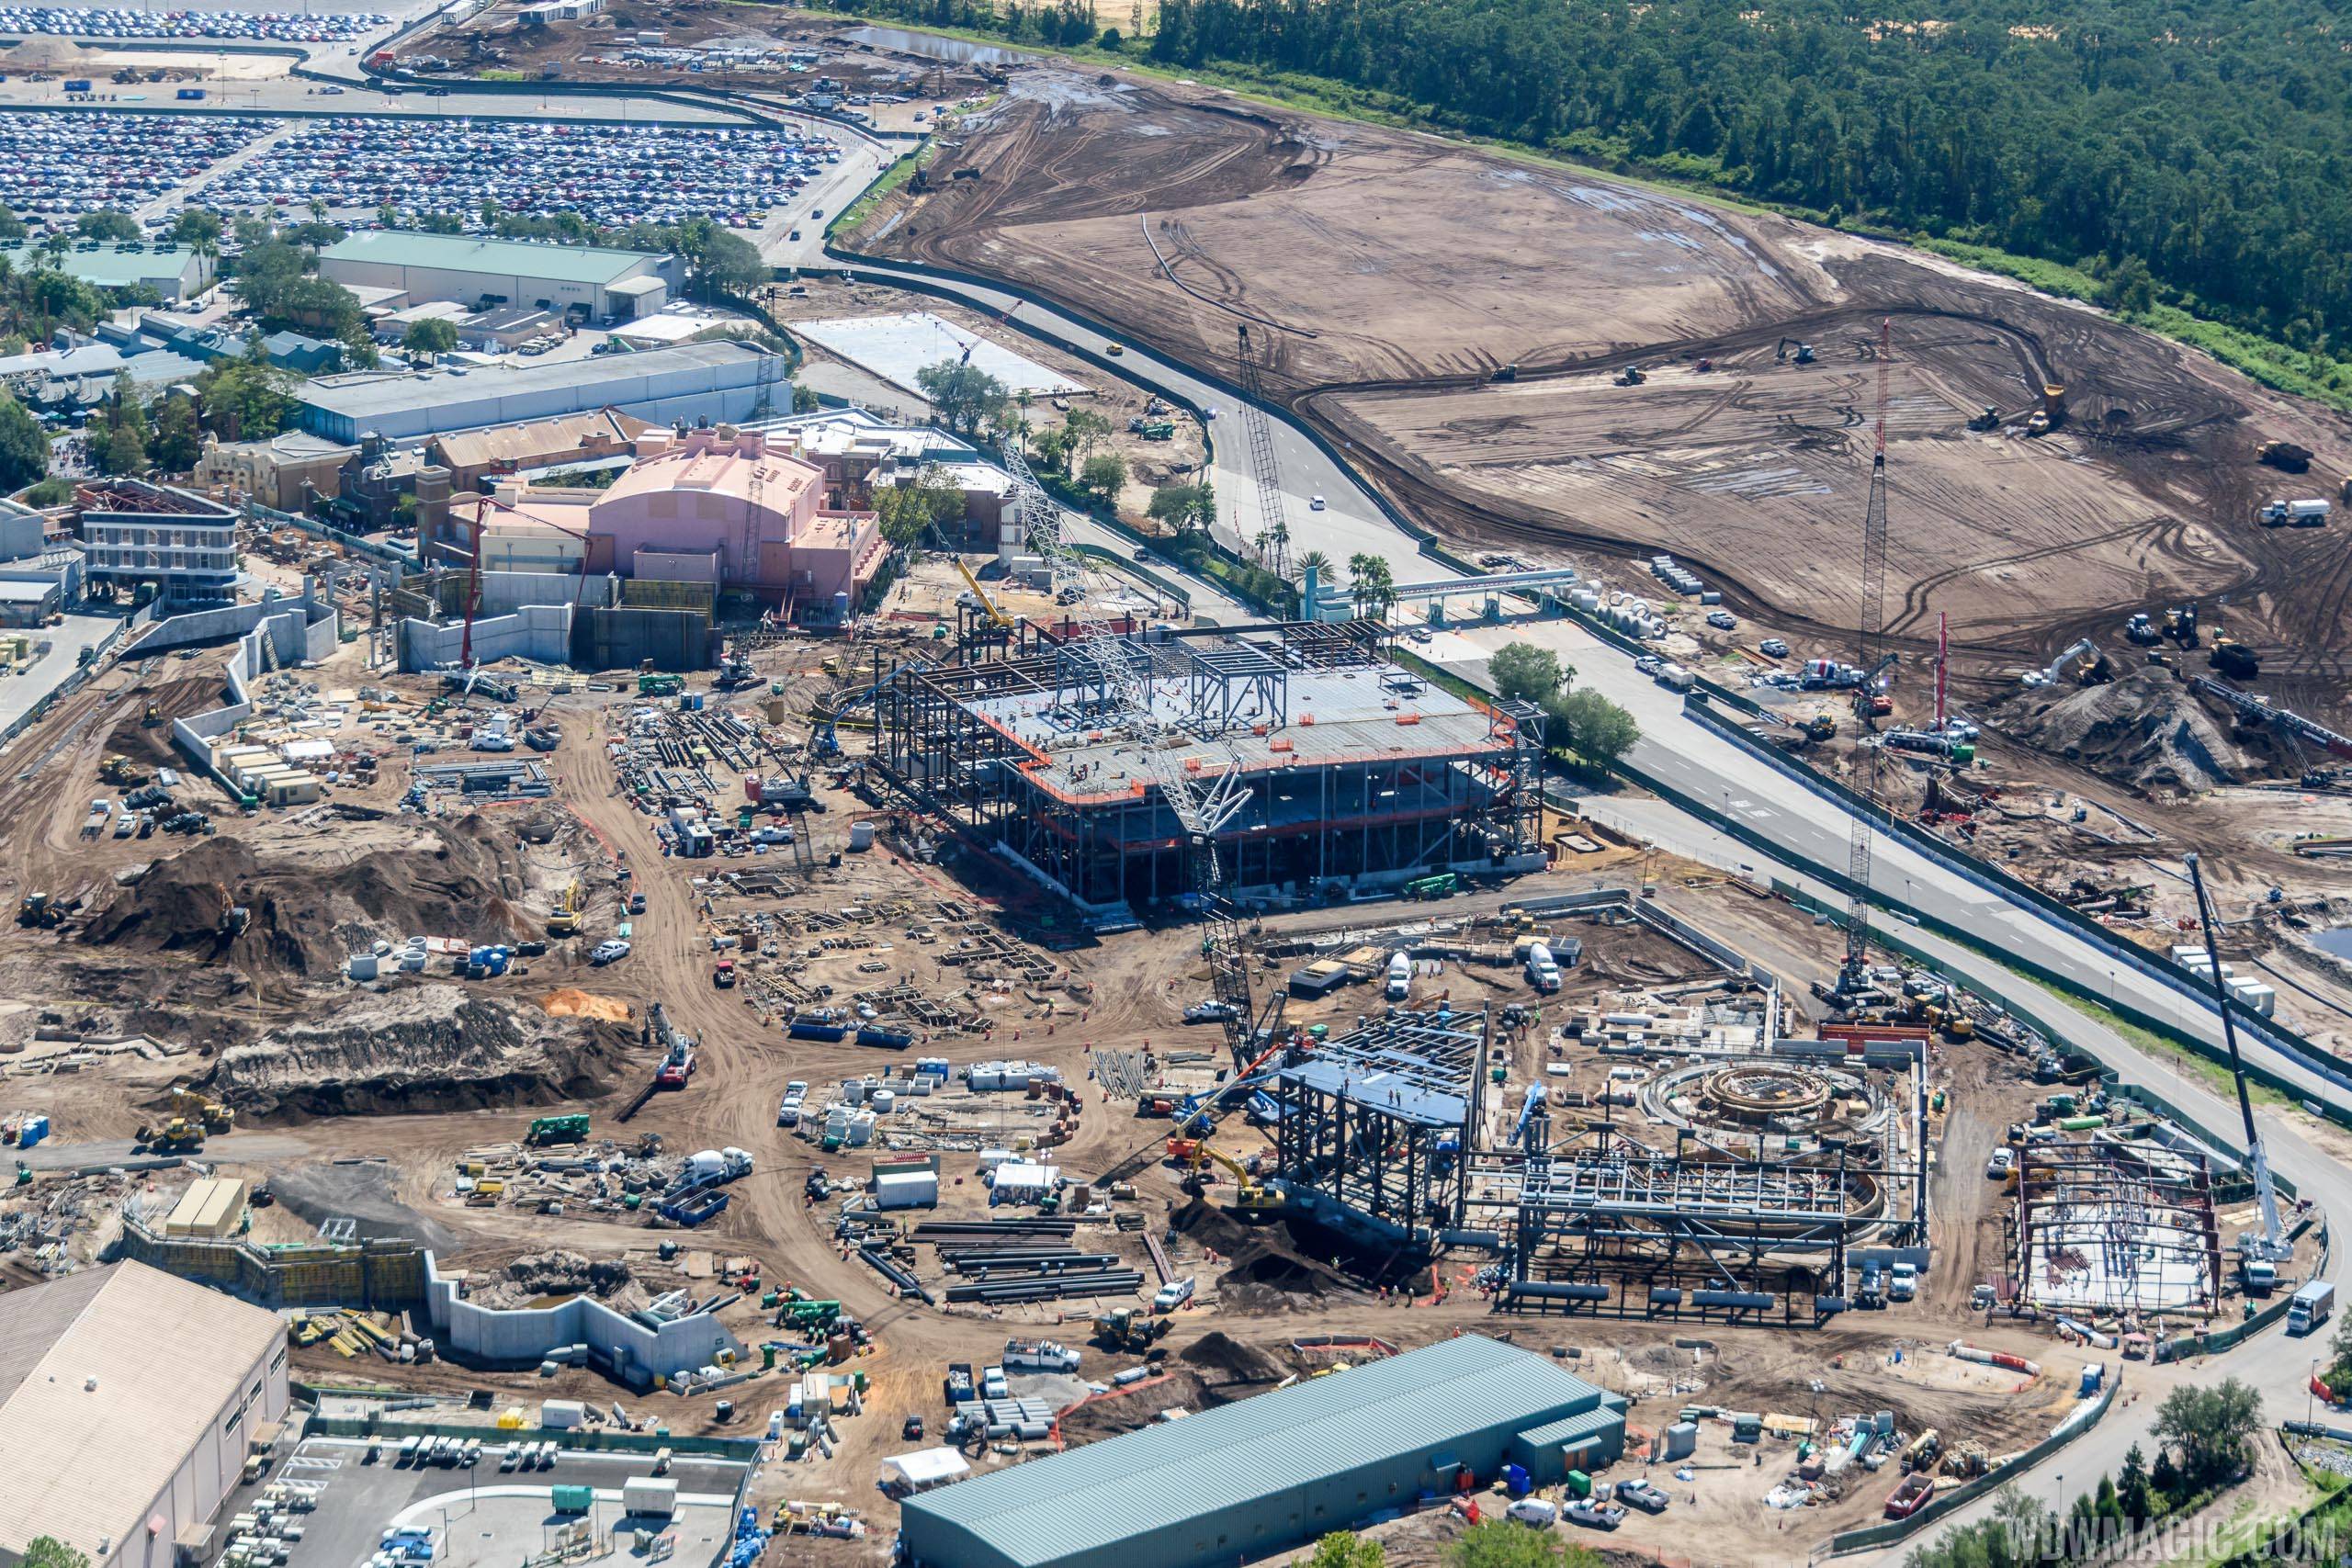 Overview of the entire Star Wars Galaxy's Edge from the air